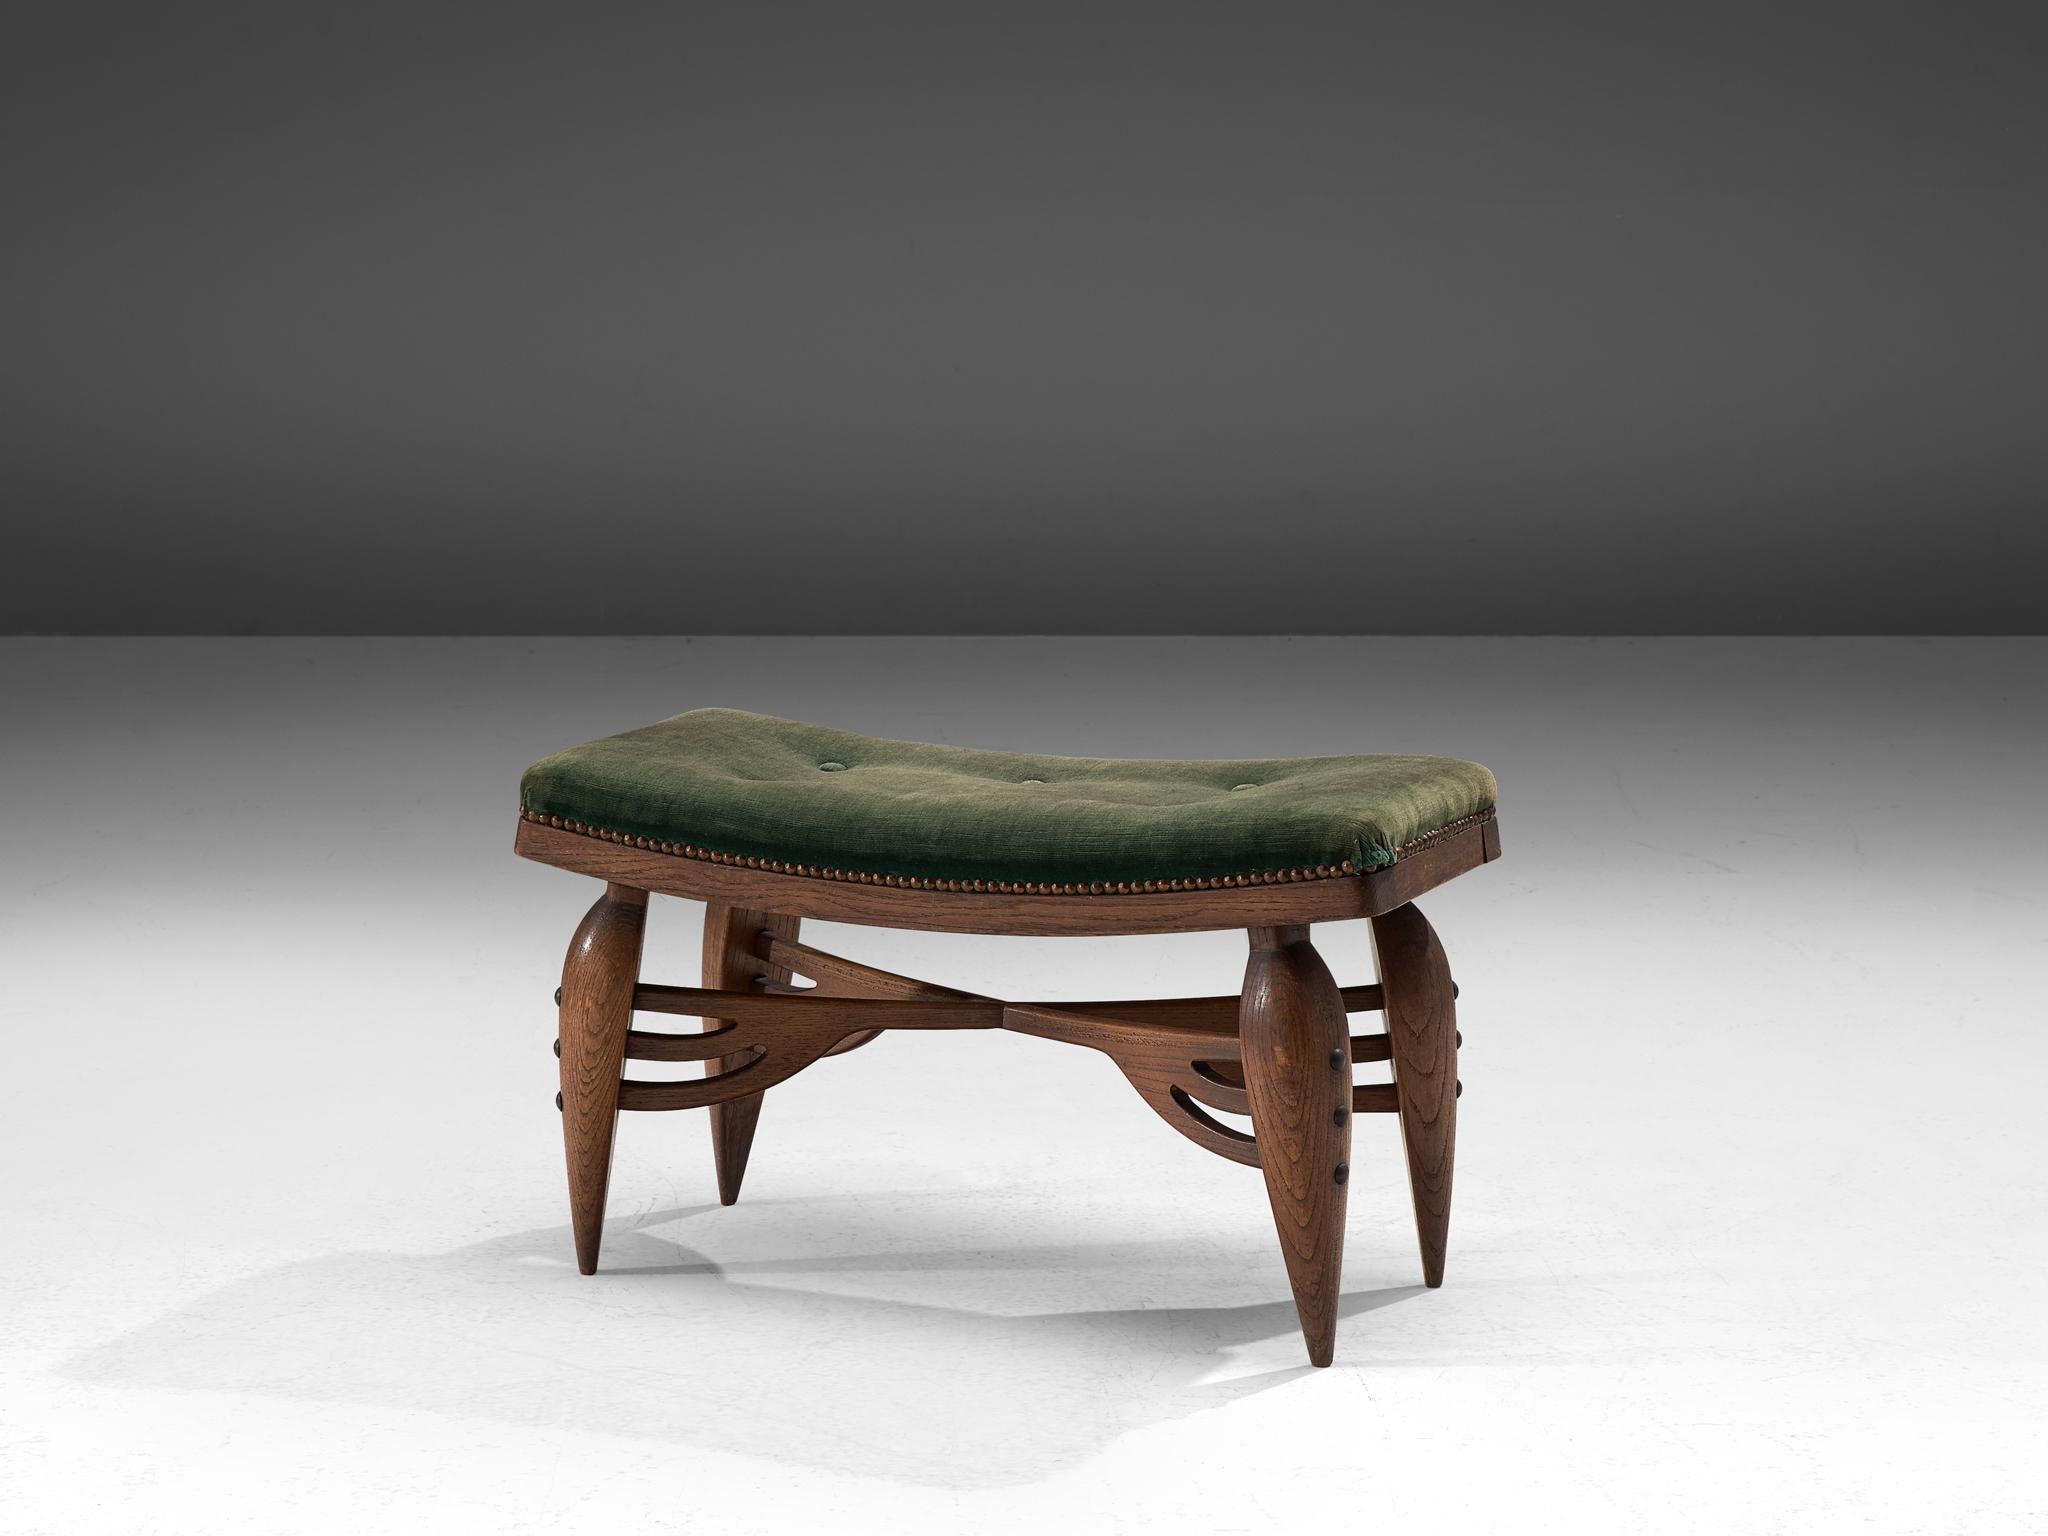 Art Deco pouf, oak and velours, France, 1930s

Beautiful sculptural stool in oak, upholstered in olive green velours. The characteristics of the Art Deco period are clearly visible. For instance, it shows curvilinear silhouettes in the wood work.